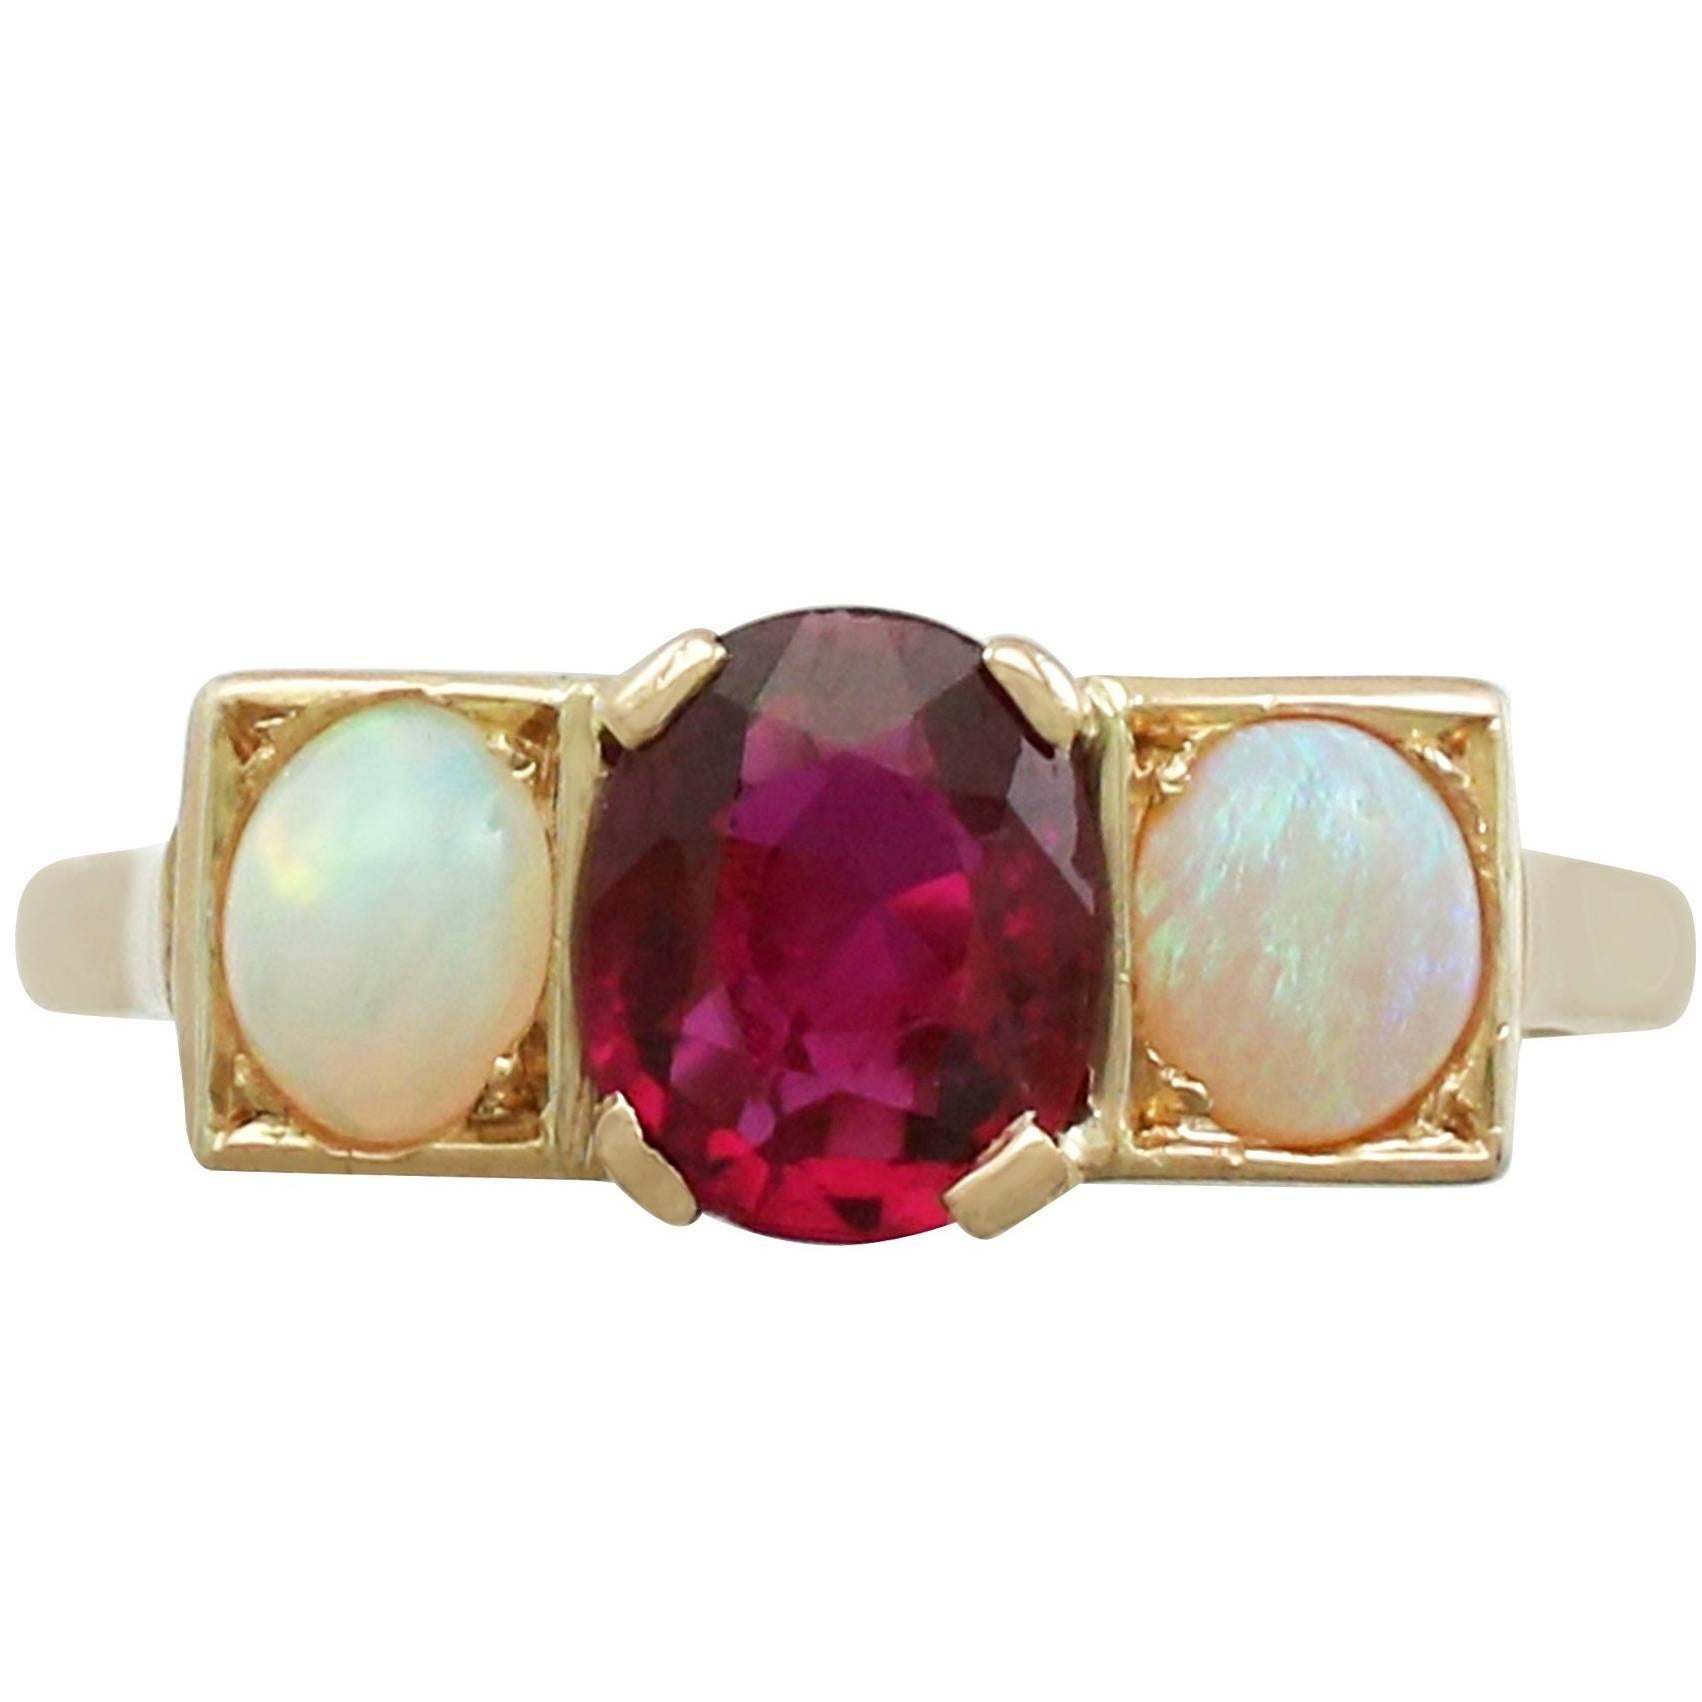 Vintage French 1.86 Carat Ruby and Opal 18 Karat Yellow Gold Dress Ring